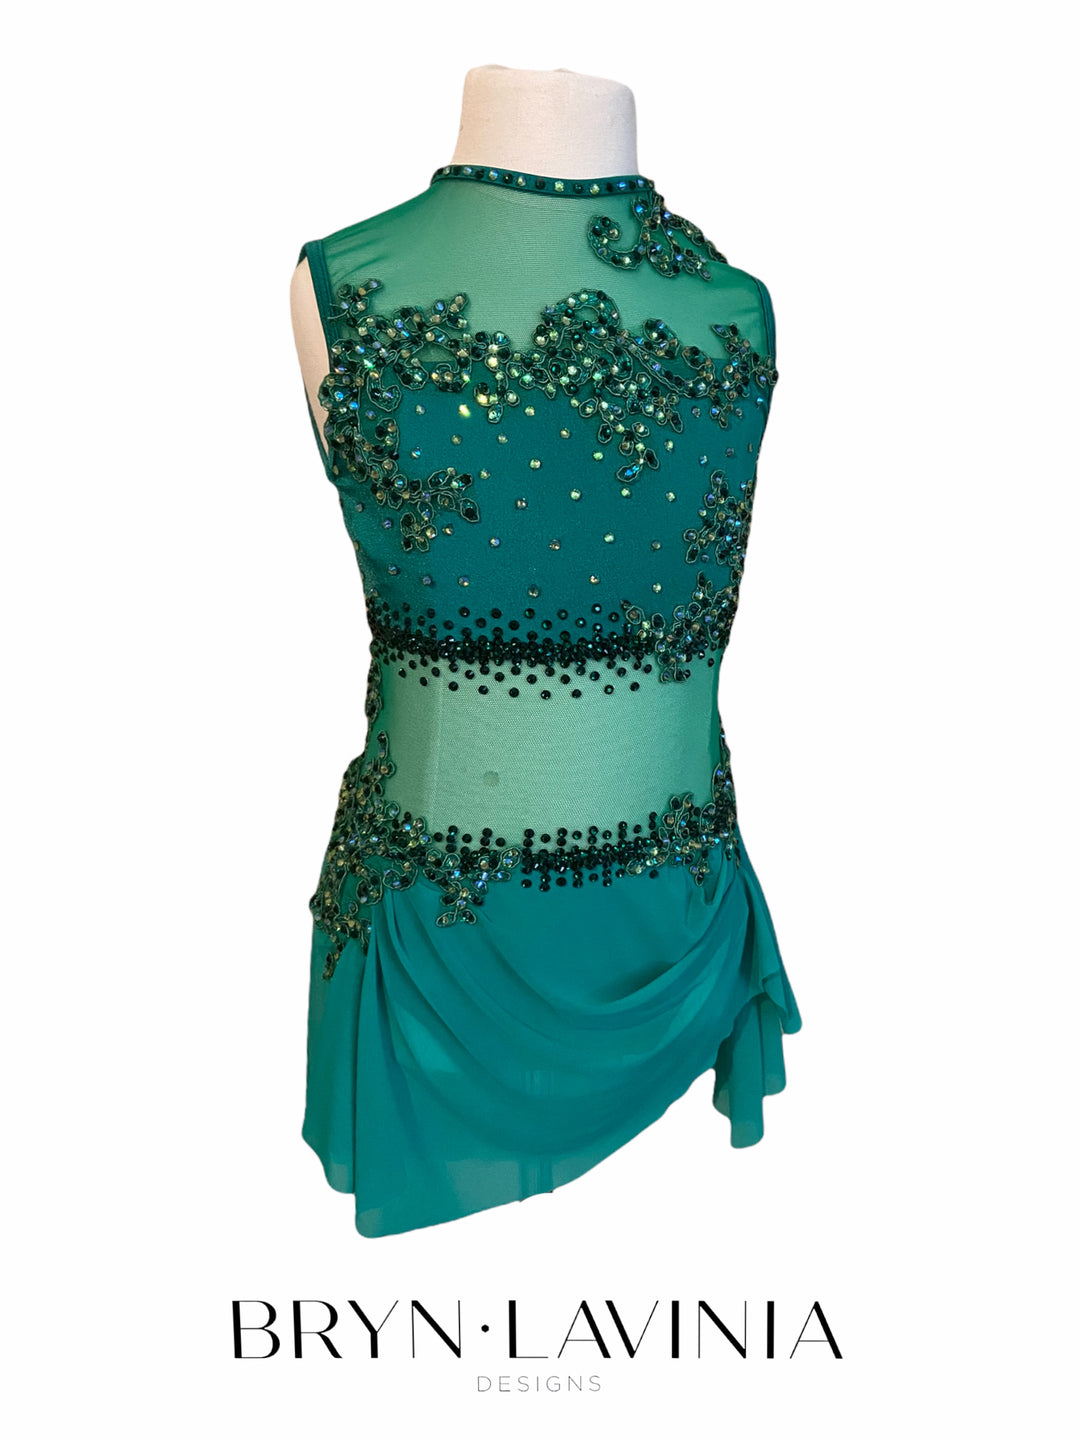 NEW Child Large green lyrical/contemporary ready-to-ship dance costume